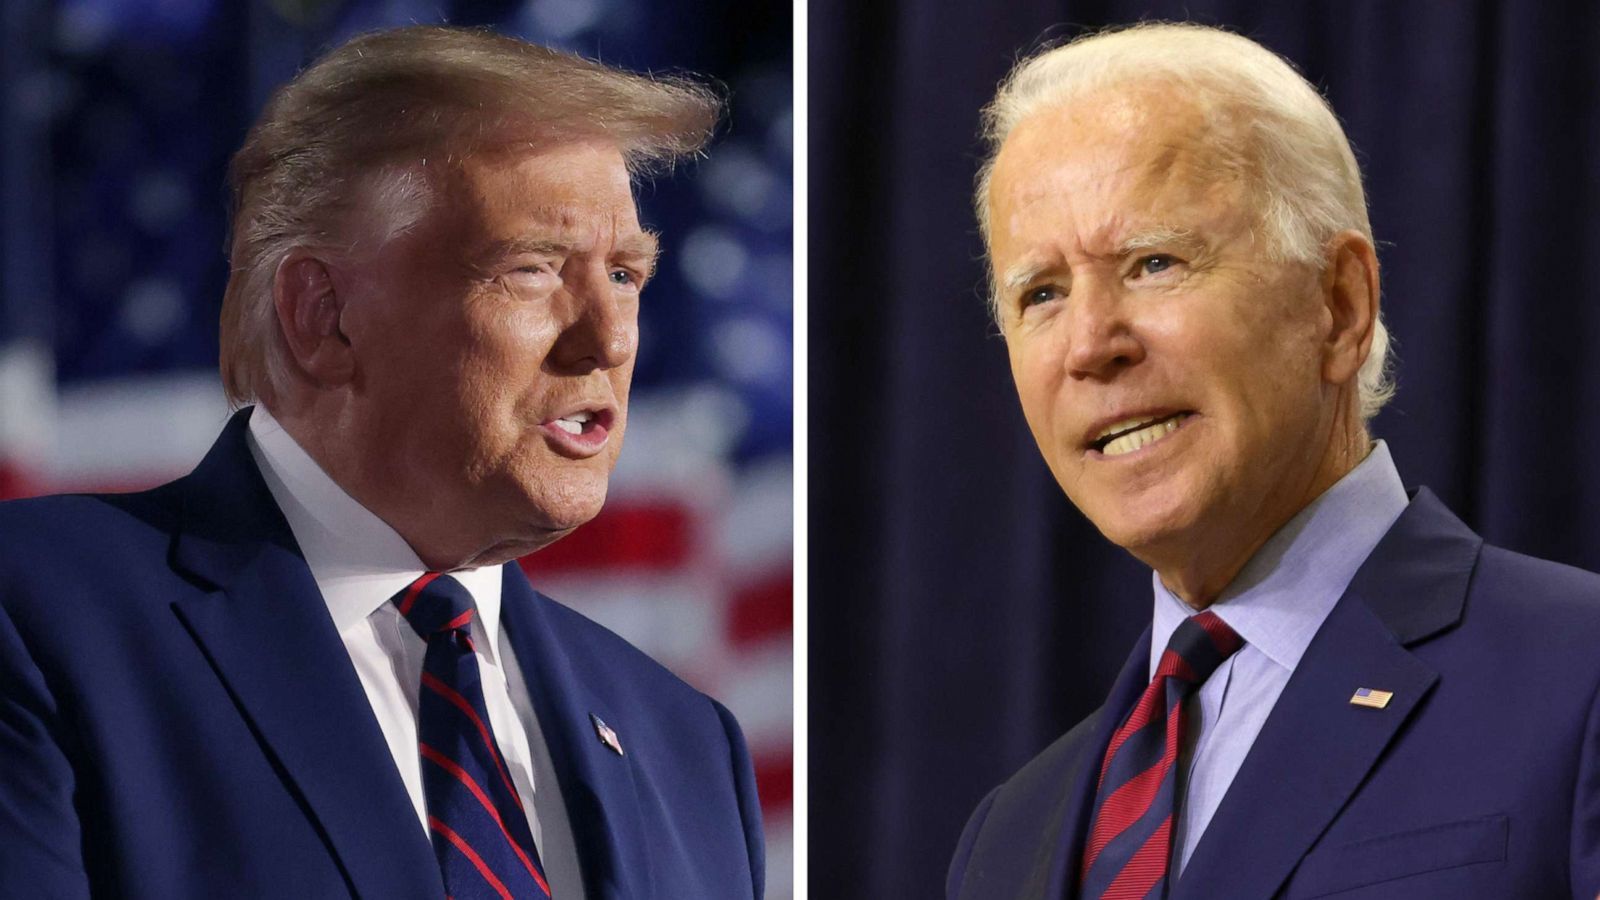 Trump vs. Biden on the issues: Election security and integrity